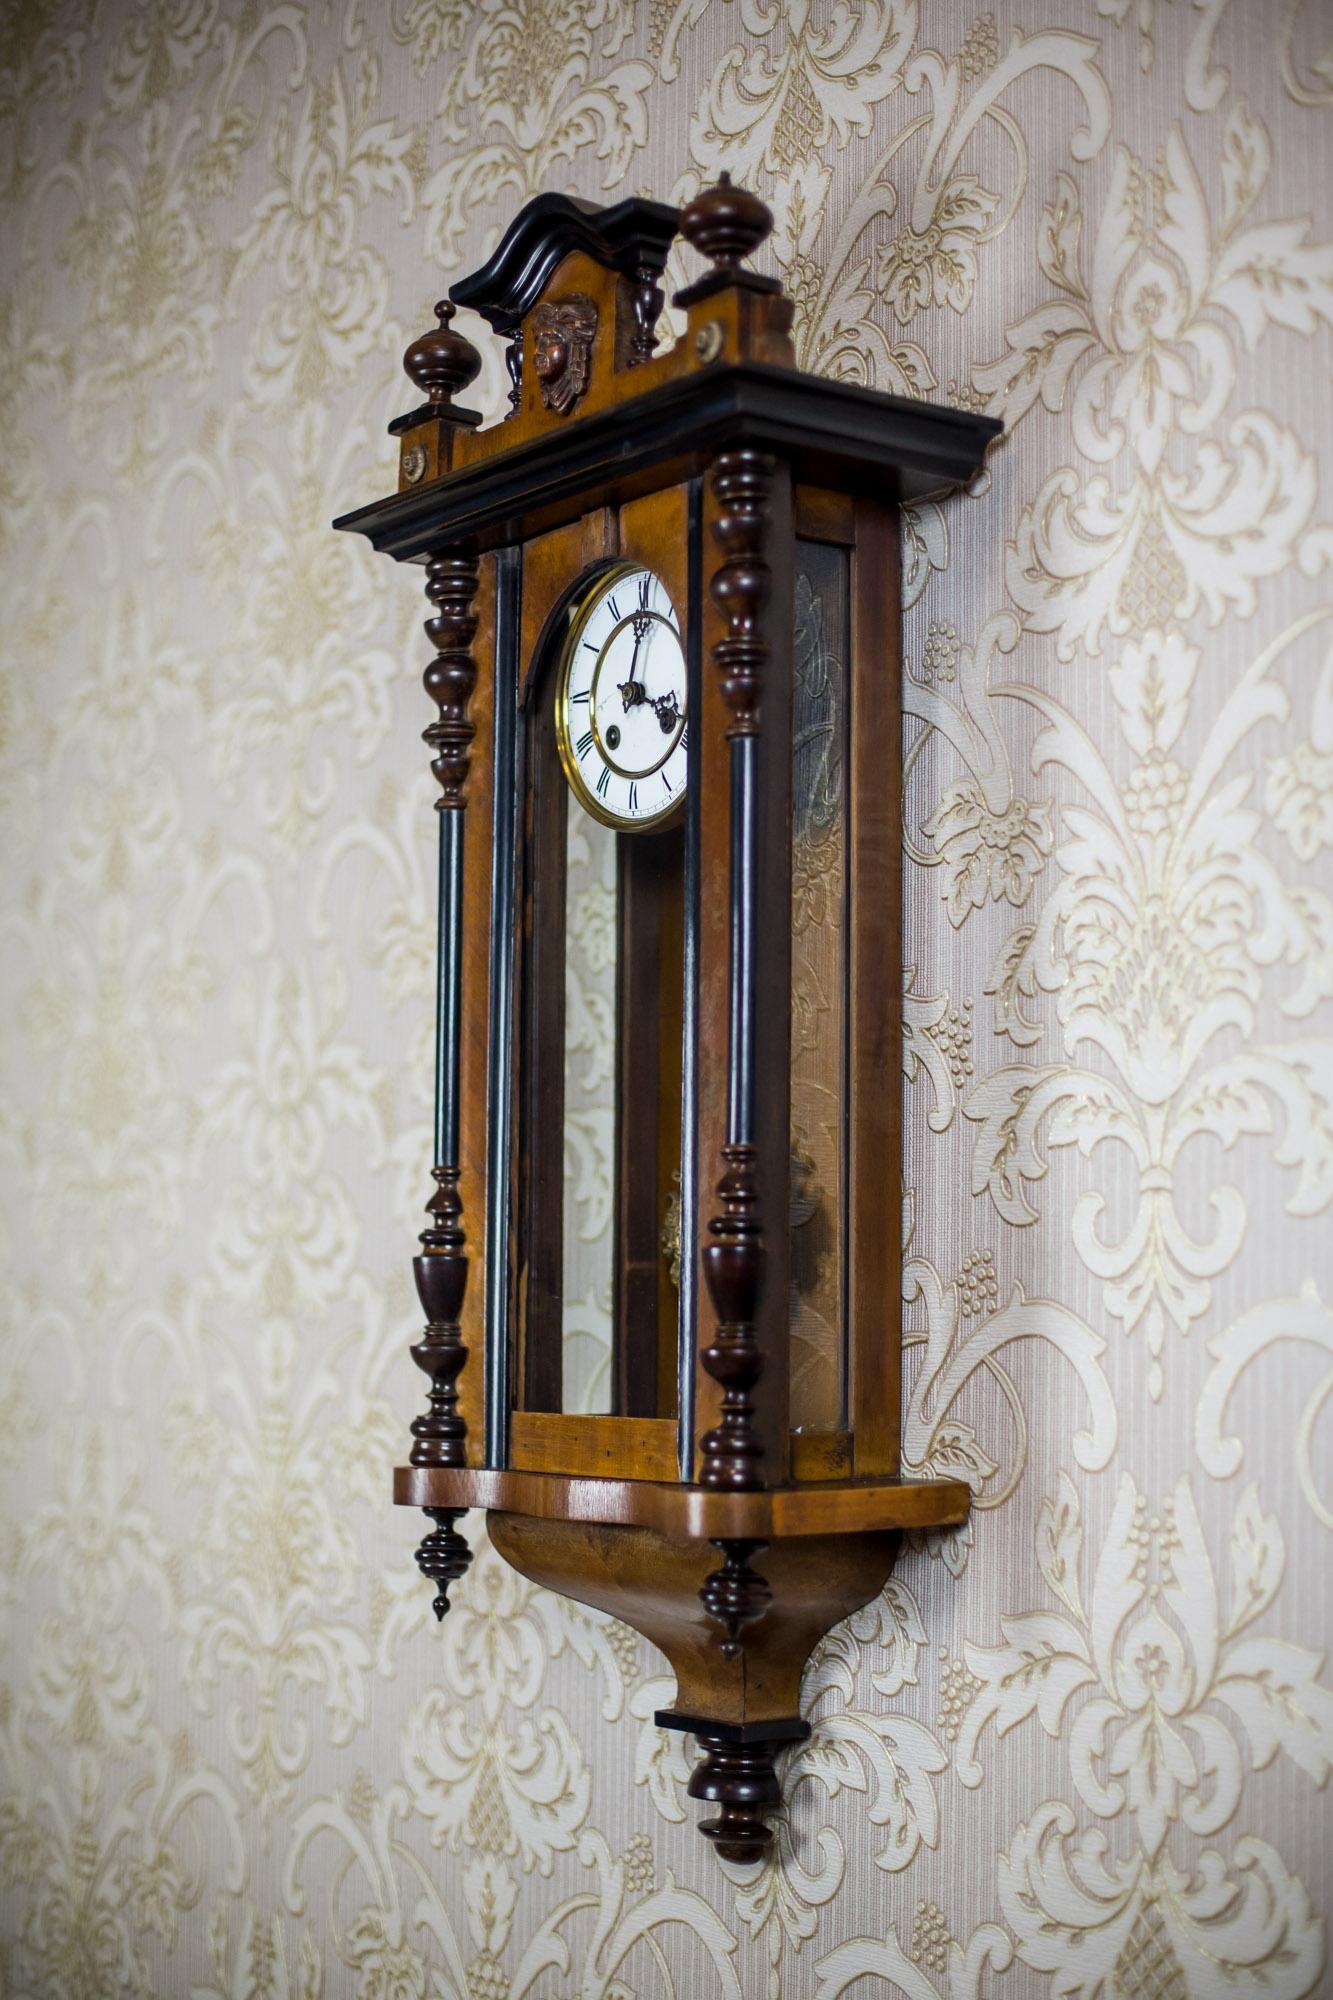 We present you this antique, circa Q4 of the 19th century.
The mechanism is in a glazed, hinged case. The pendulum is cast in brass.
Furthermore, the case is topped with a cornice with a crest and pinnacles.

This clock strikes full hours and